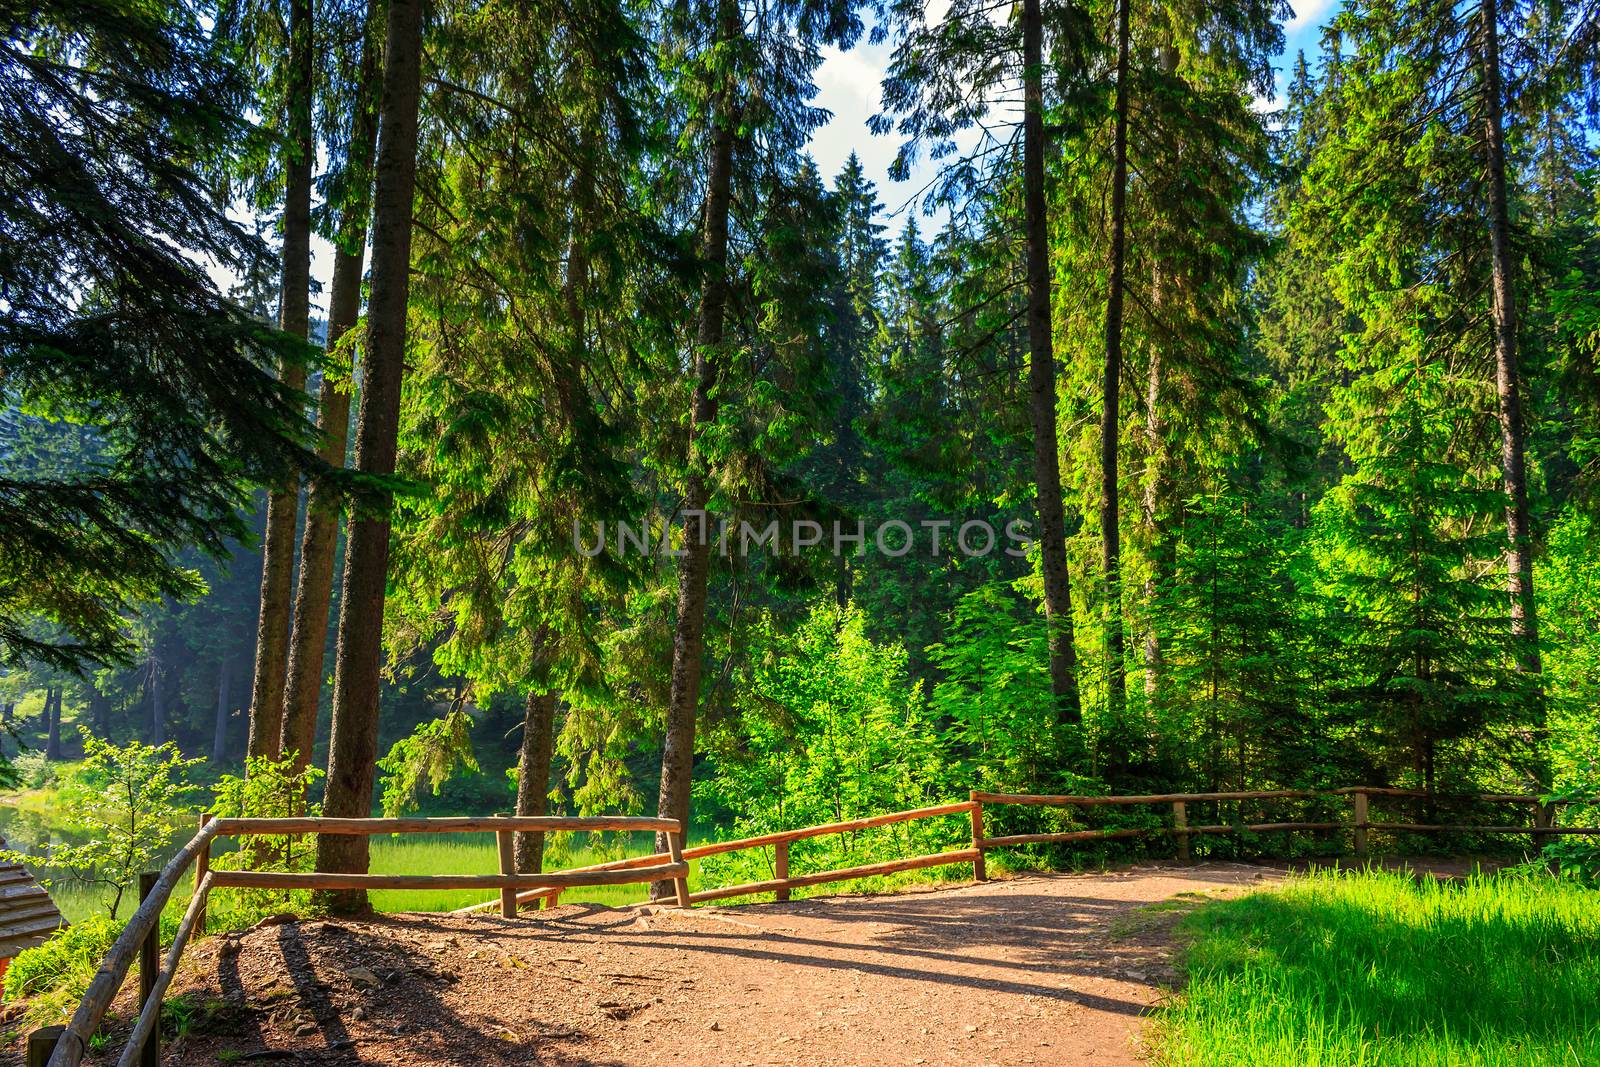 wide trail with a wooden fence near the lawn in the shade of pine trees of green forest